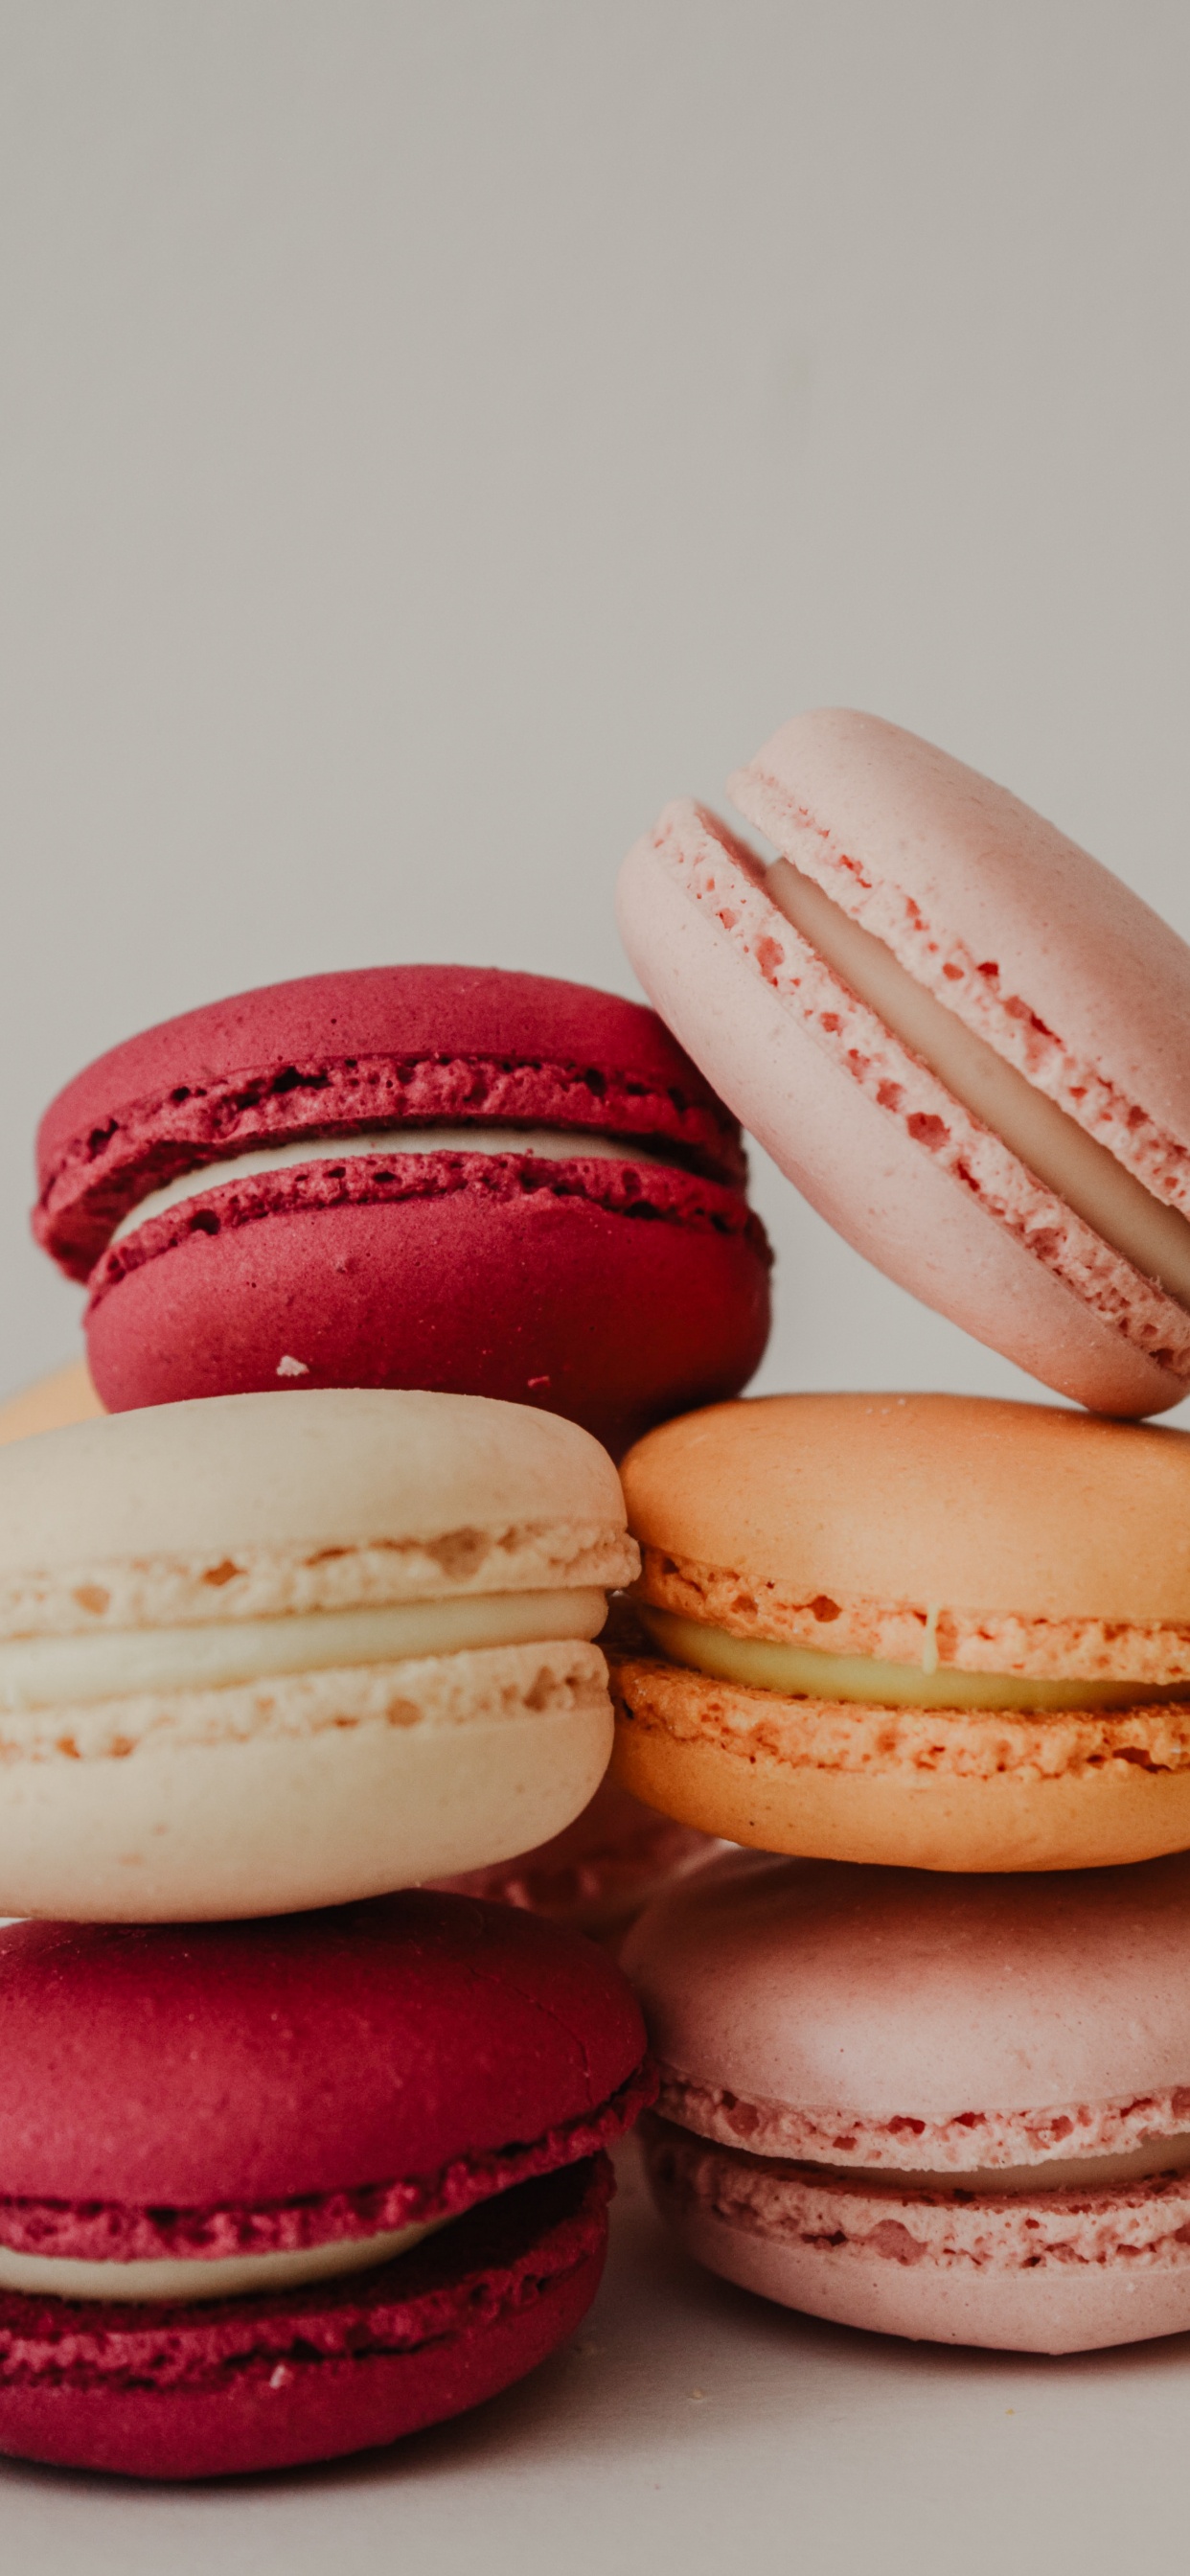 3 Pink and White Macaroons. Wallpaper in 1242x2688 Resolution